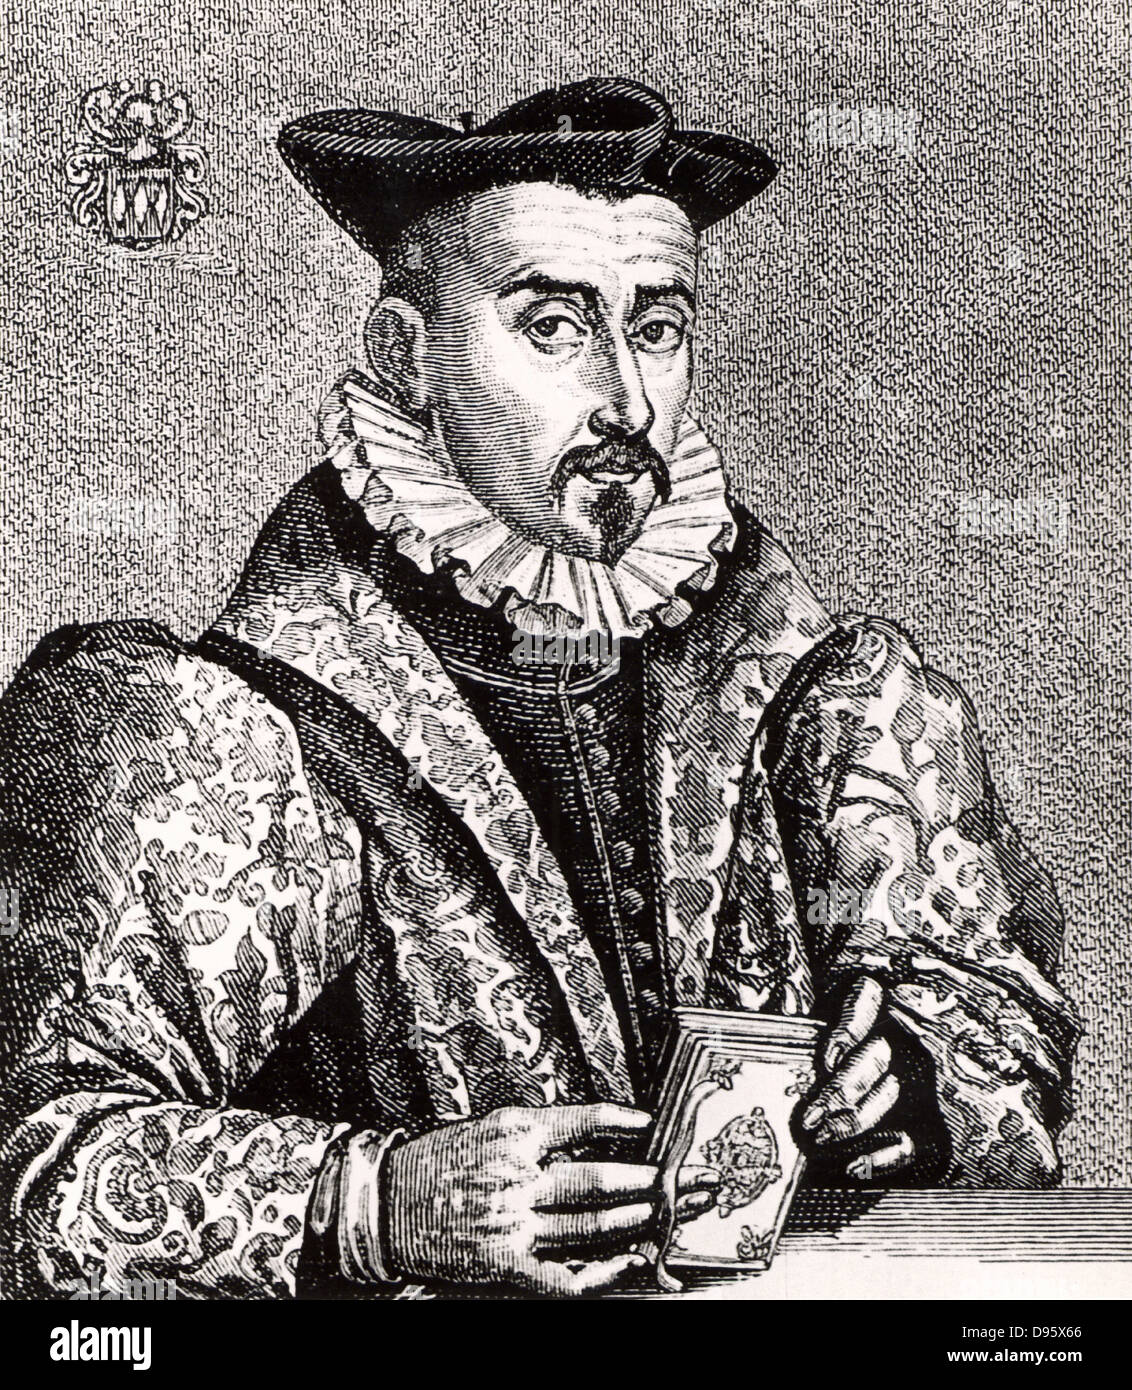 Martin Beer (1617-1692) German philosopher and geographer born at Nuremberg.  Engraving from From 'Icones Virorum' by Friedrich Roth-Scholtz (Nuremberg, 1725). Stock Photo